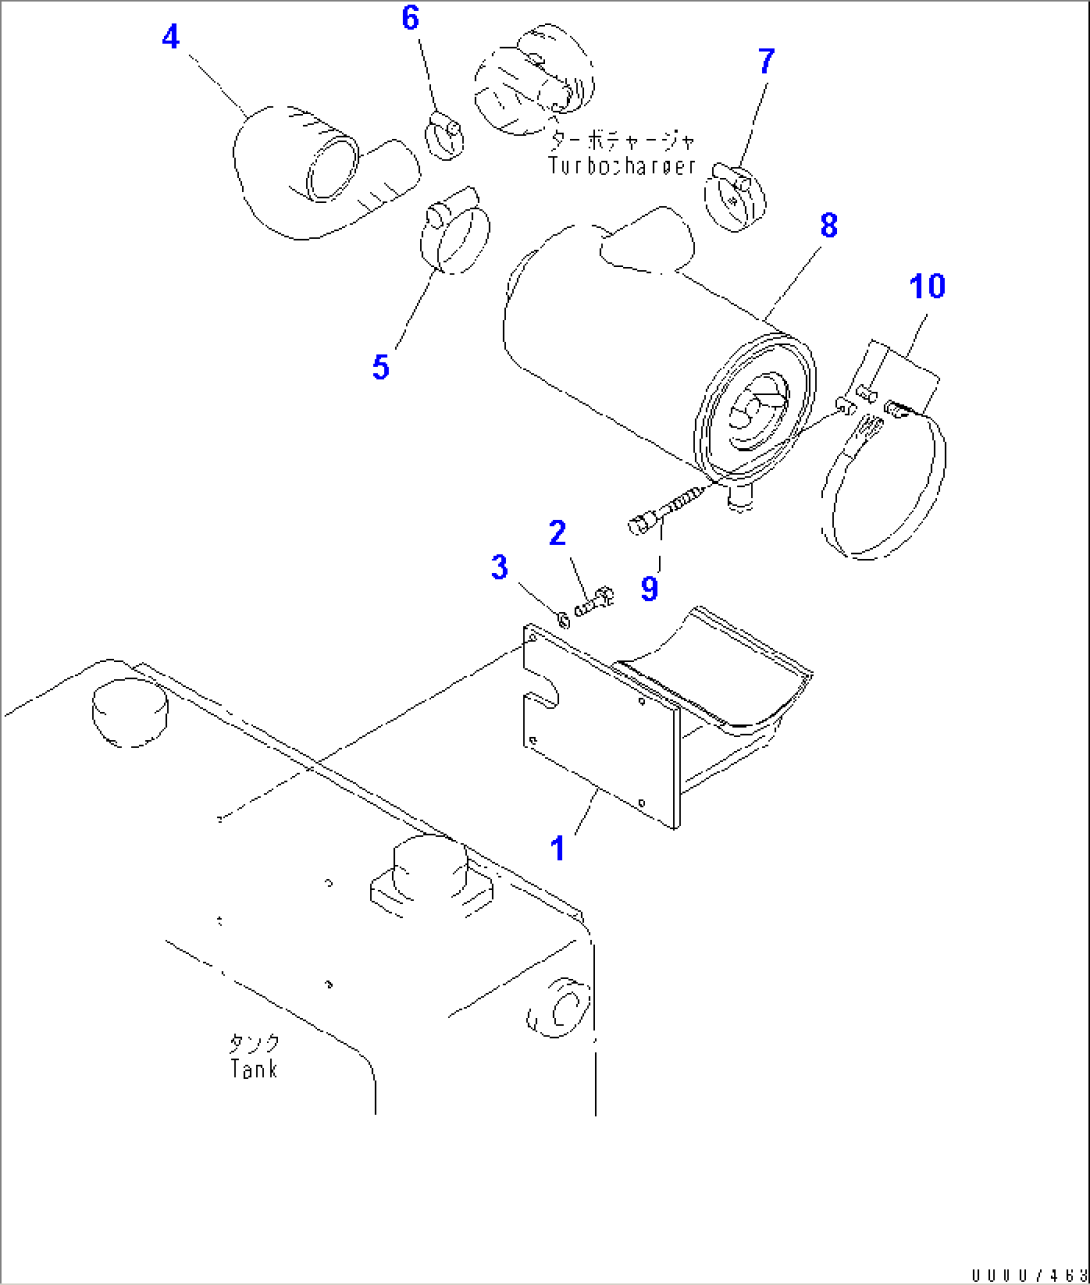 AIR CLEANER AND AIR CLEANER CONNECTION(#10243-)